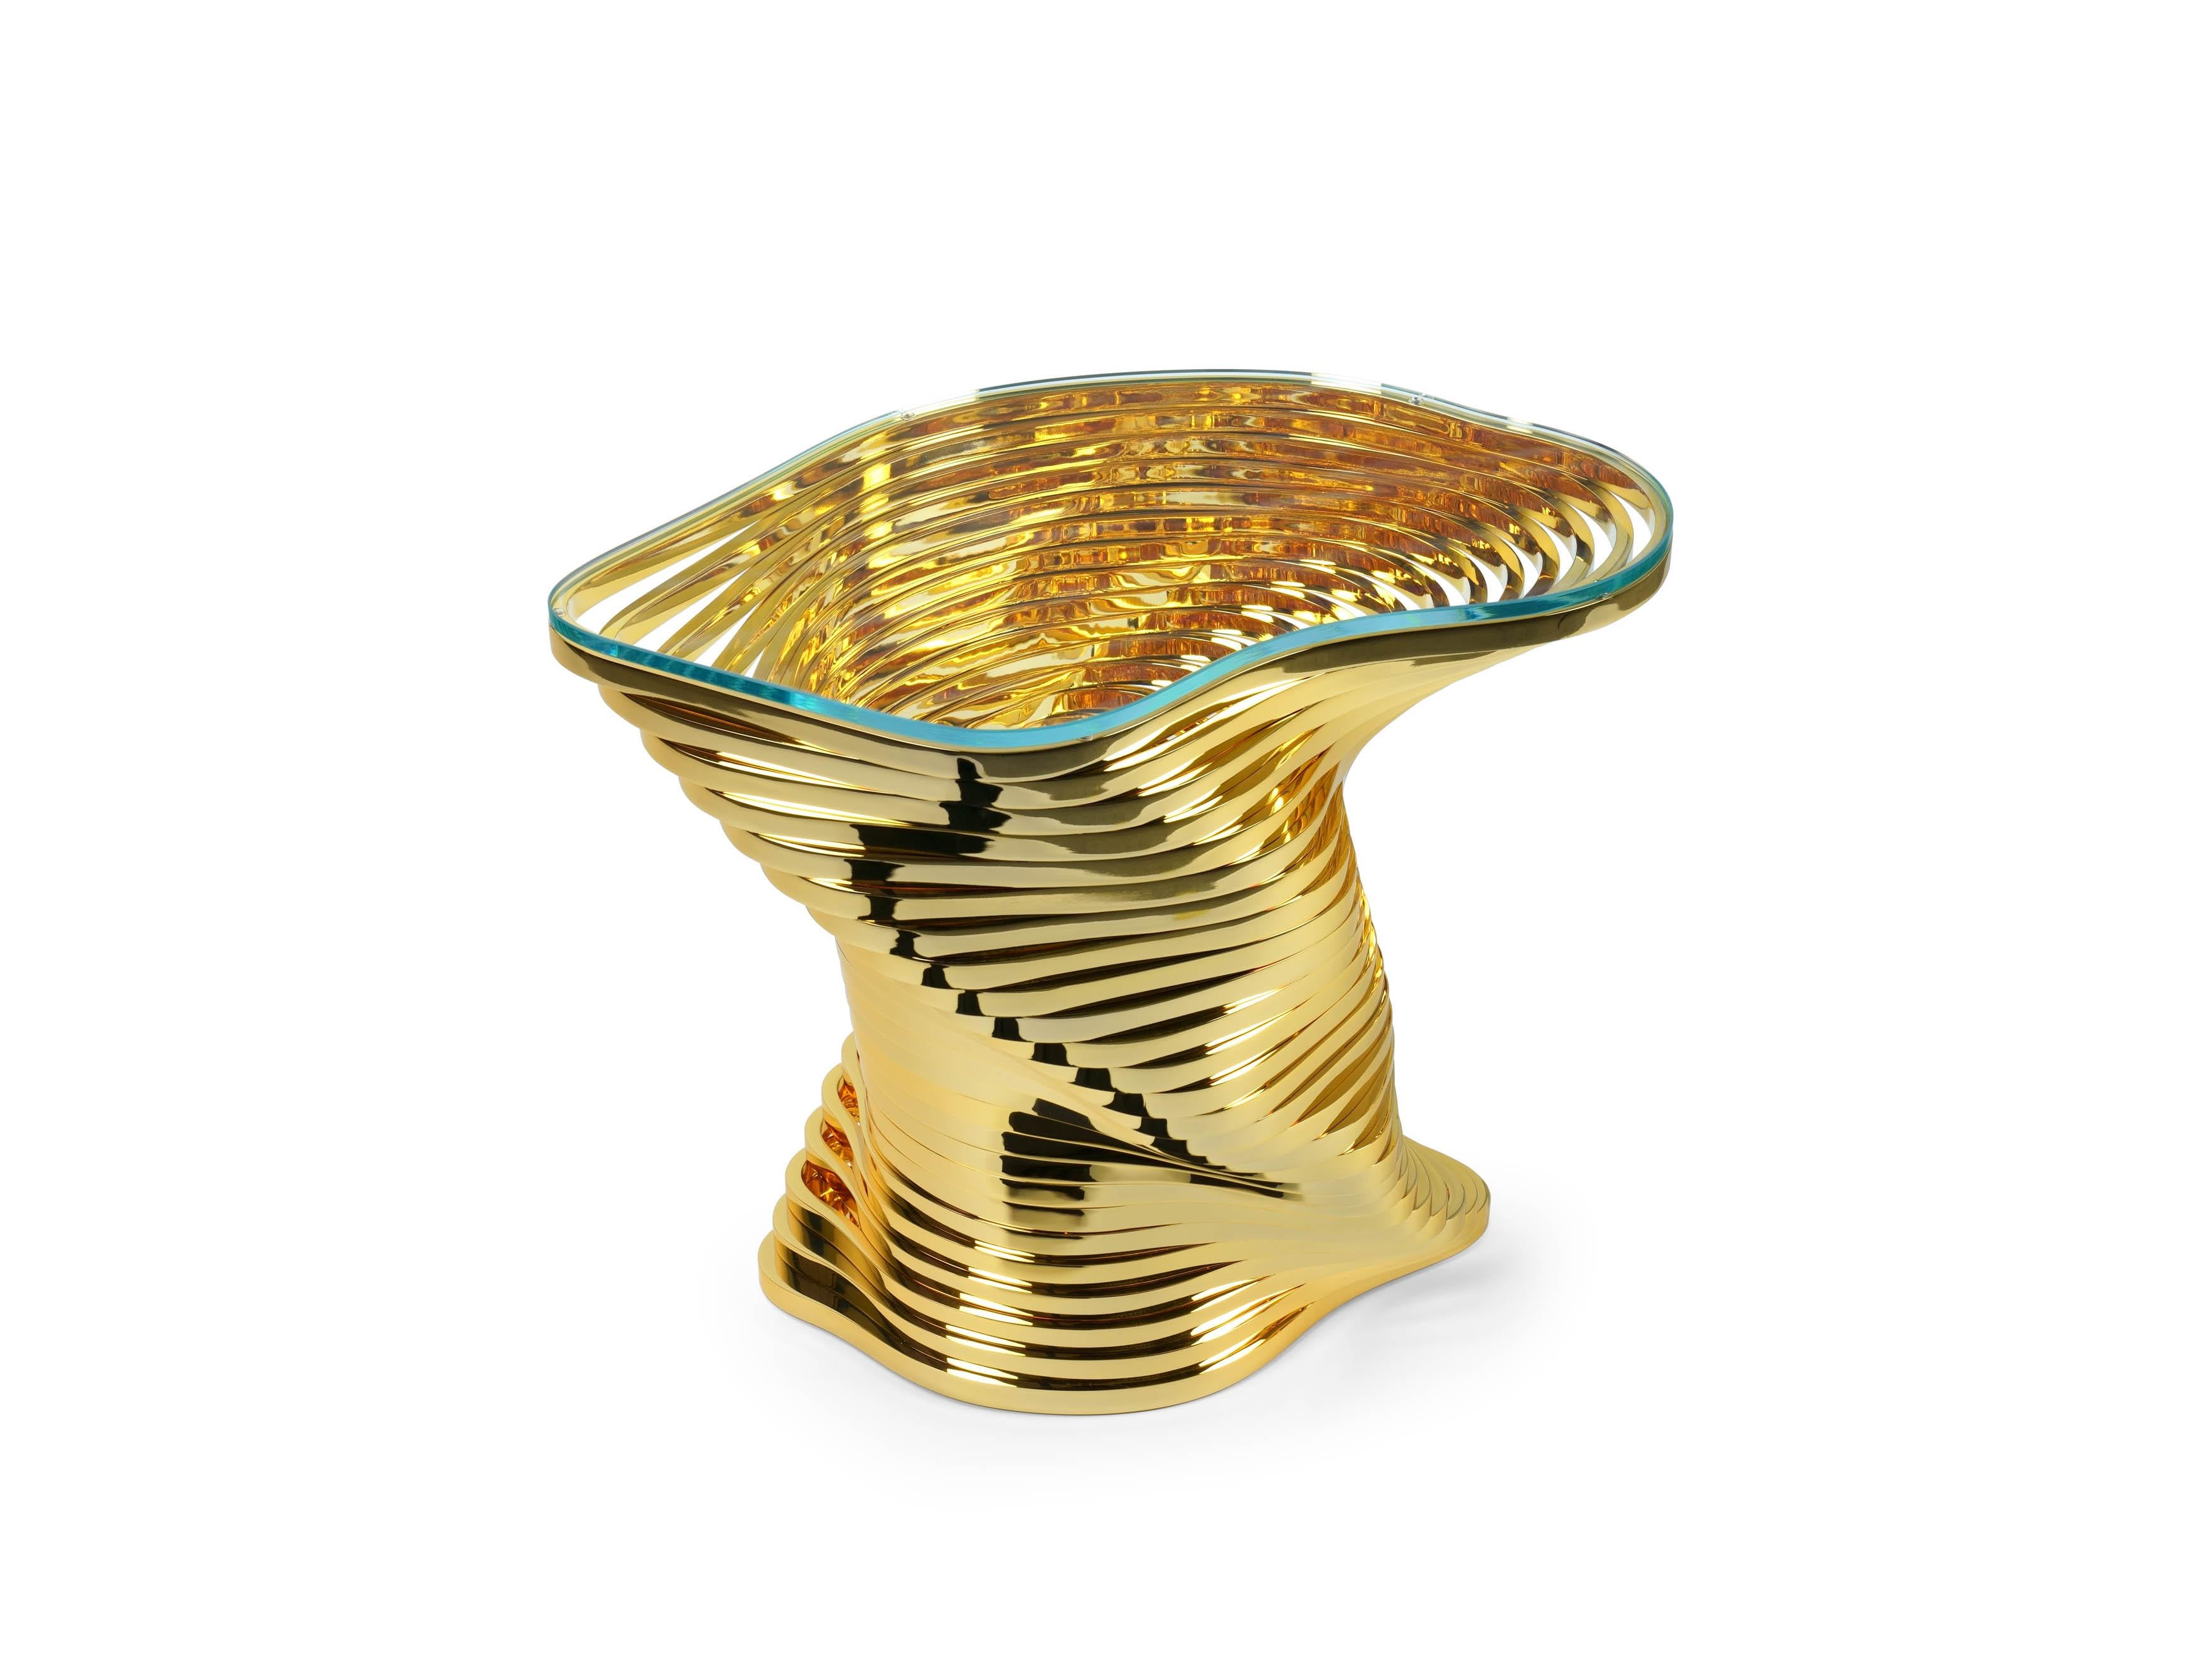 Italian Side Table Sculpture Gold Plated Mirror Stainless Steel Crystal Glass Top Italy For Sale